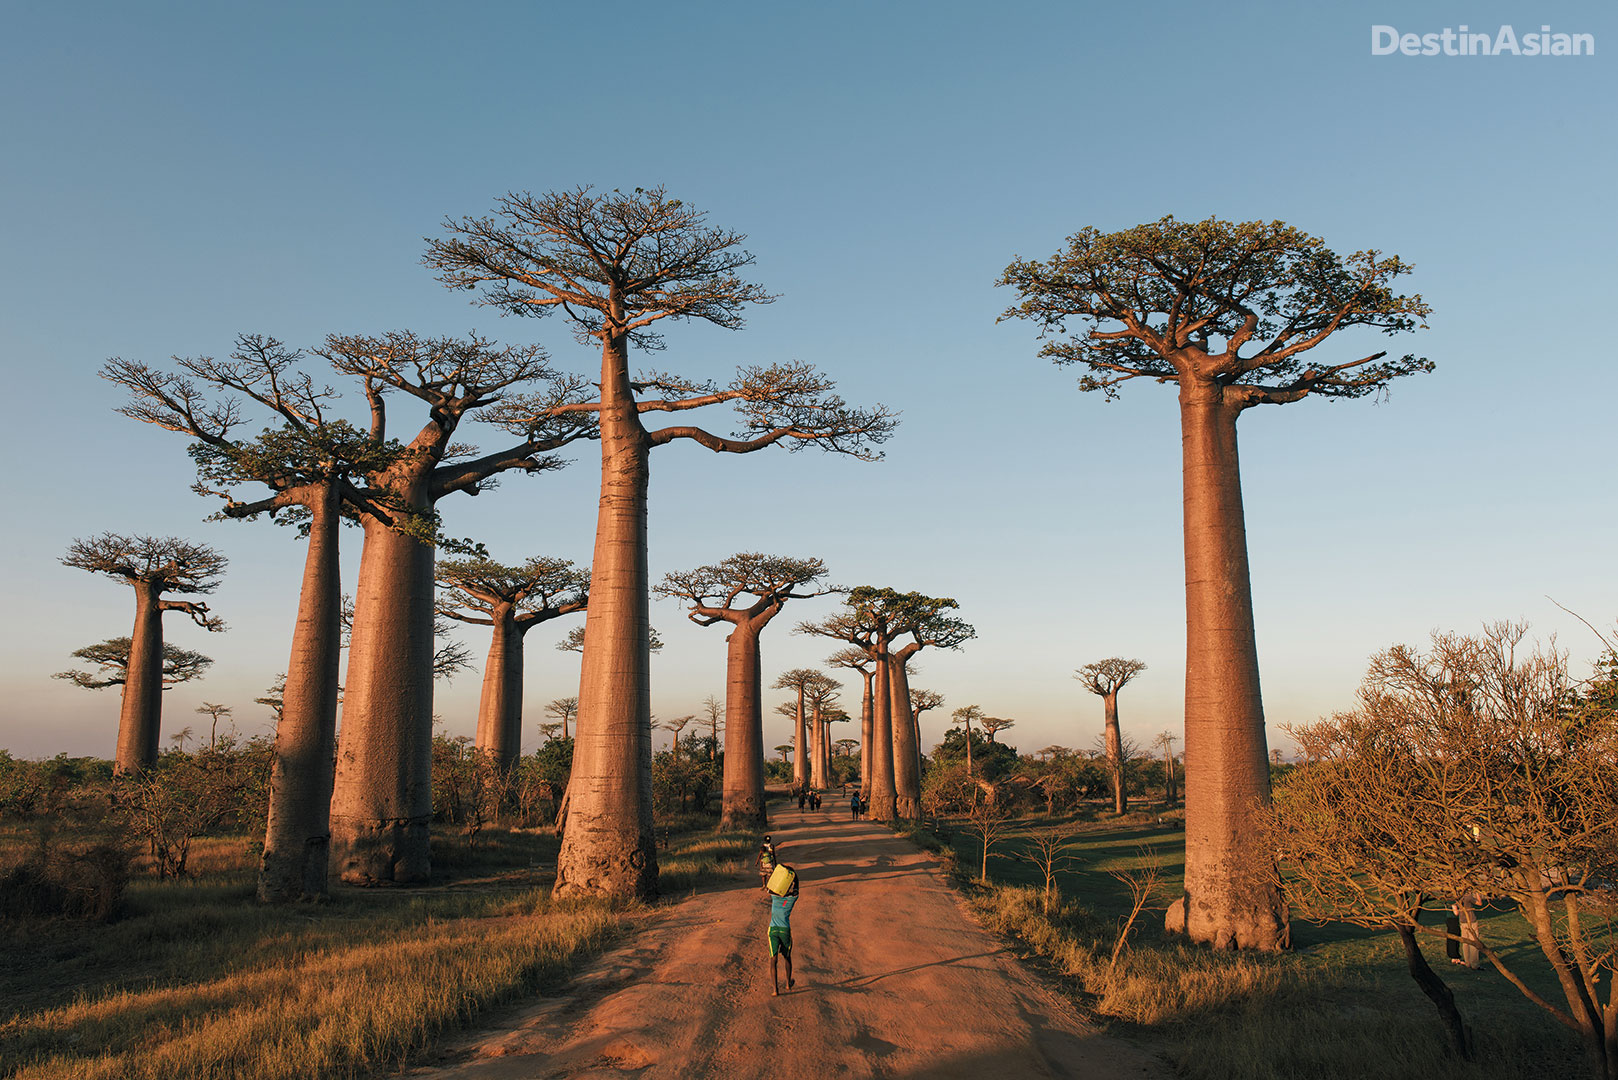 The Avenue of the Baobabs is one of Madagascar's most memorable sights. 